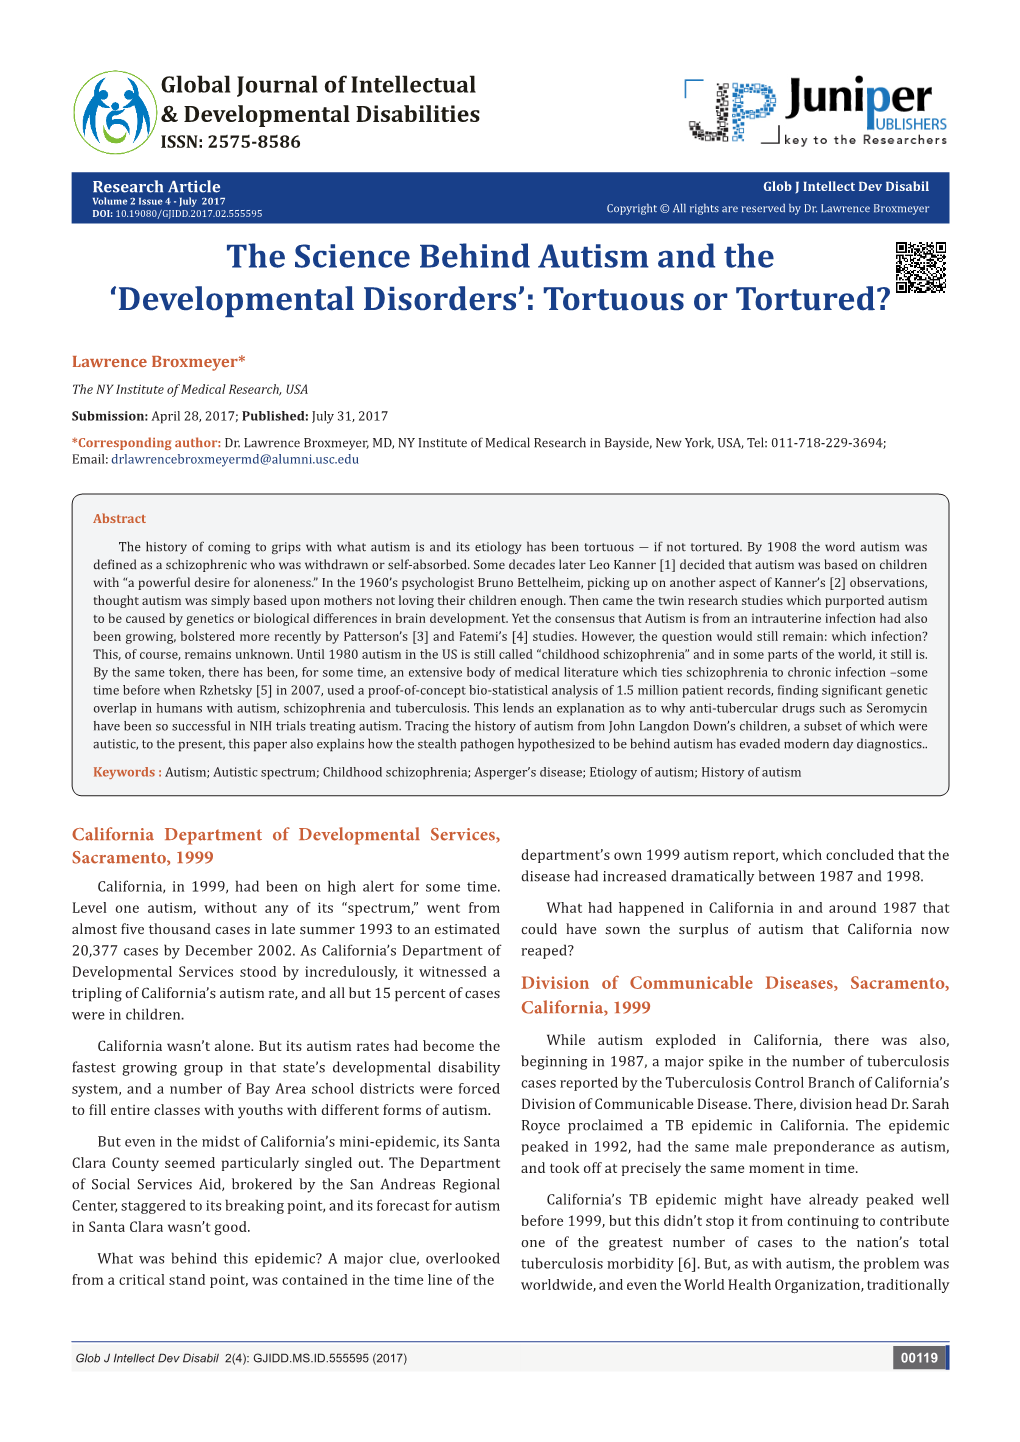 The Science Behind Autism and the ‘Developmental Disorders’: Tortuous Or Tortured?